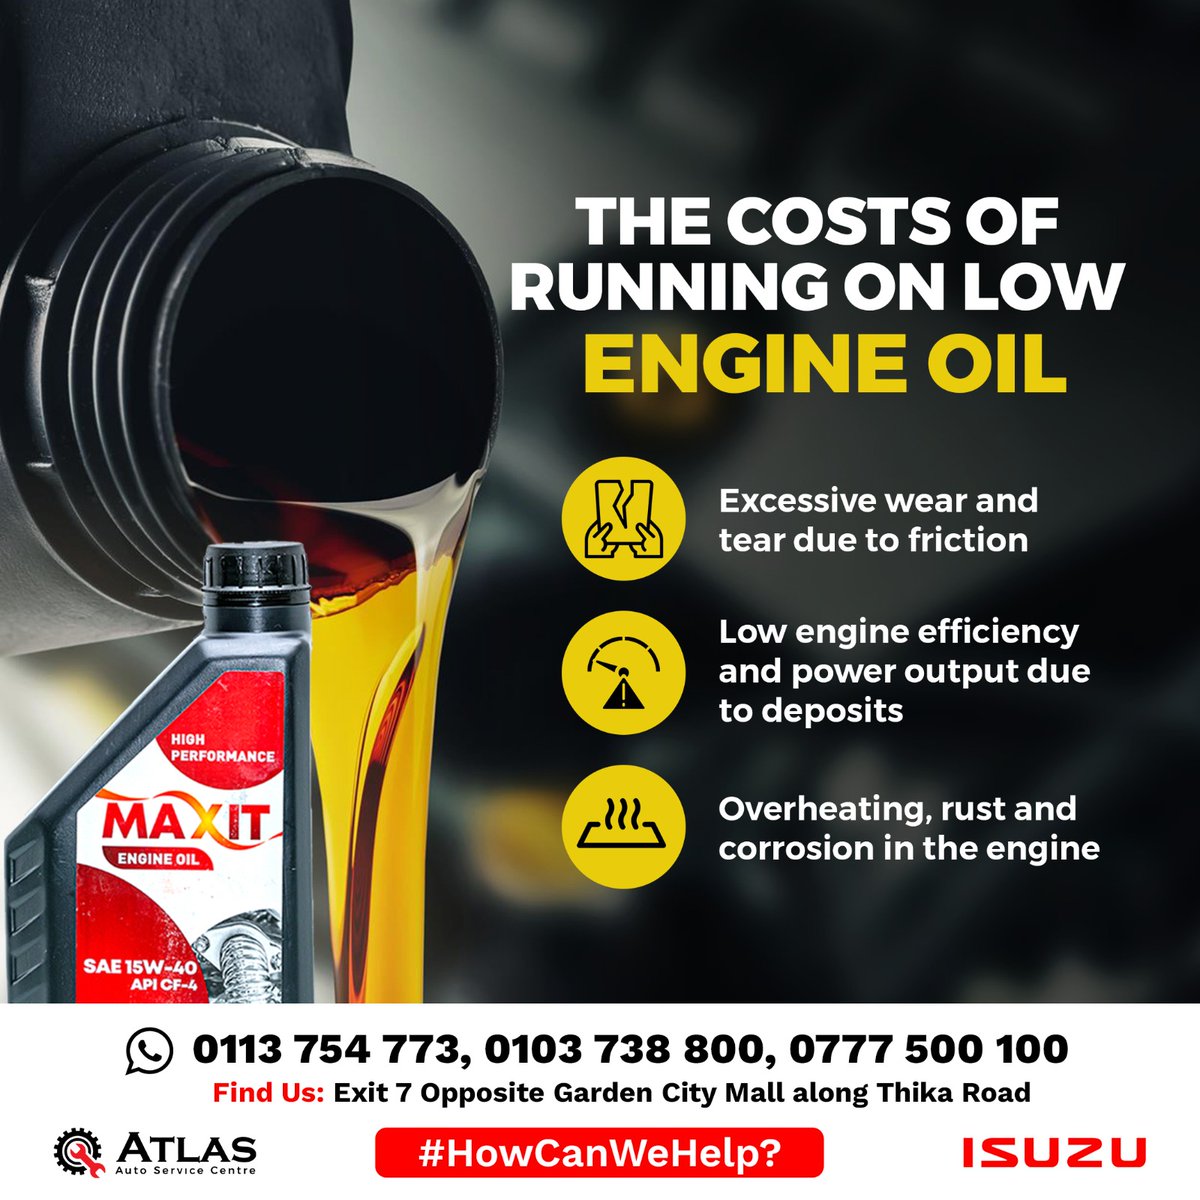 Running on low engine oil is a sure fire way to damage your car. Don't risk it! Get your oil changed today at Atlas Auto Service Centre #howcanwehelp #qualityoil #serviceparts